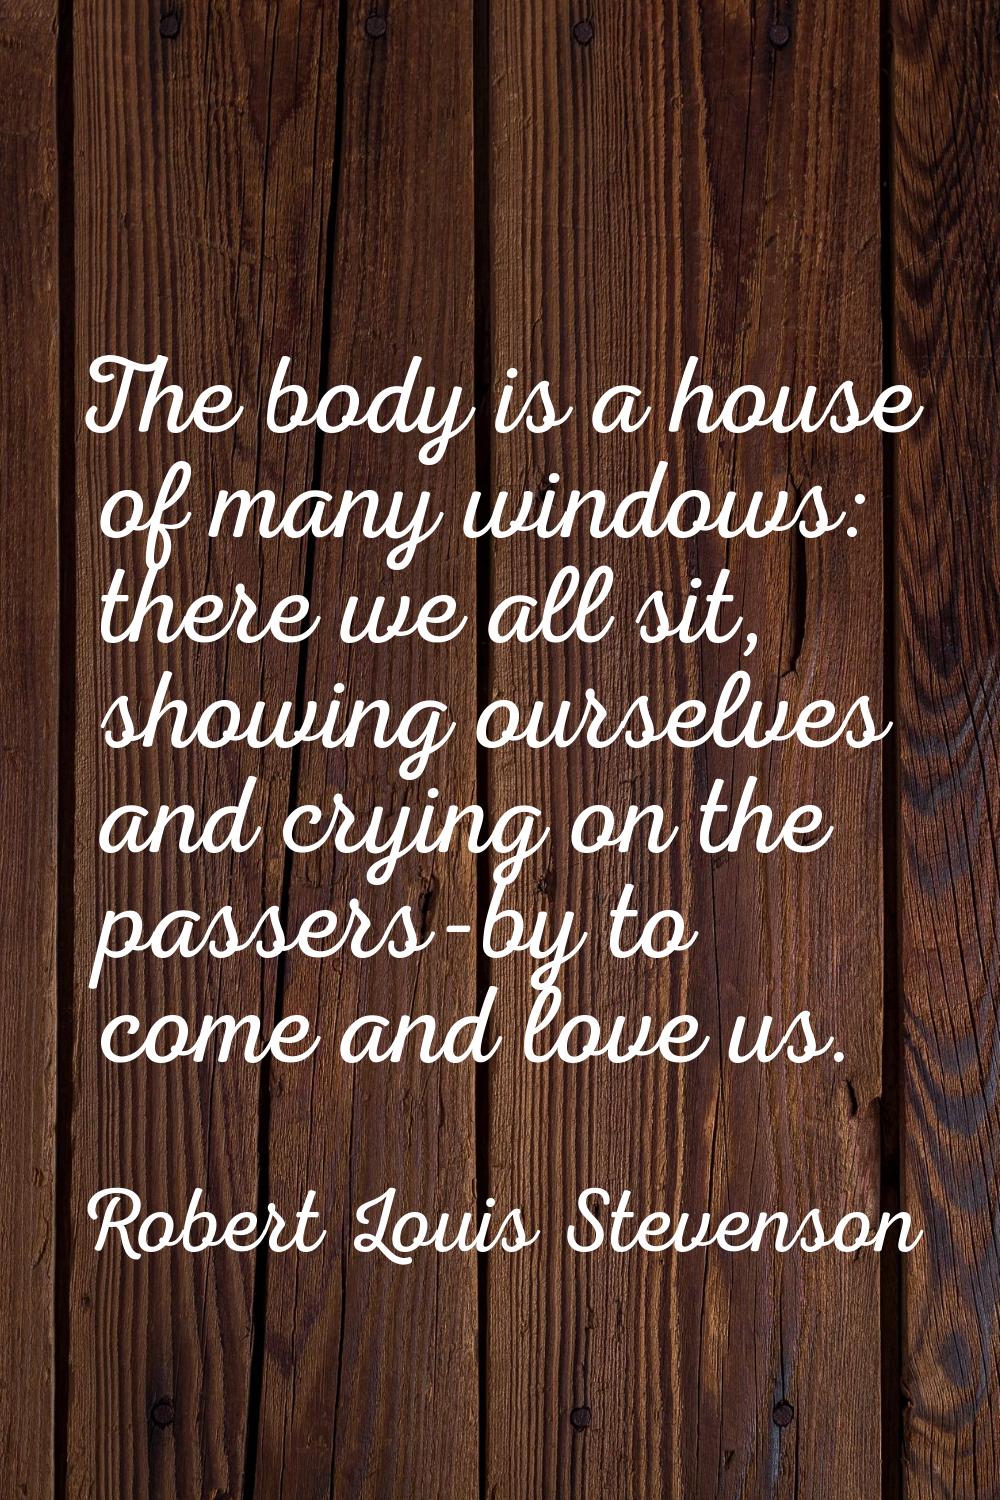 The body is a house of many windows: there we all sit, showing ourselves and crying on the passers-